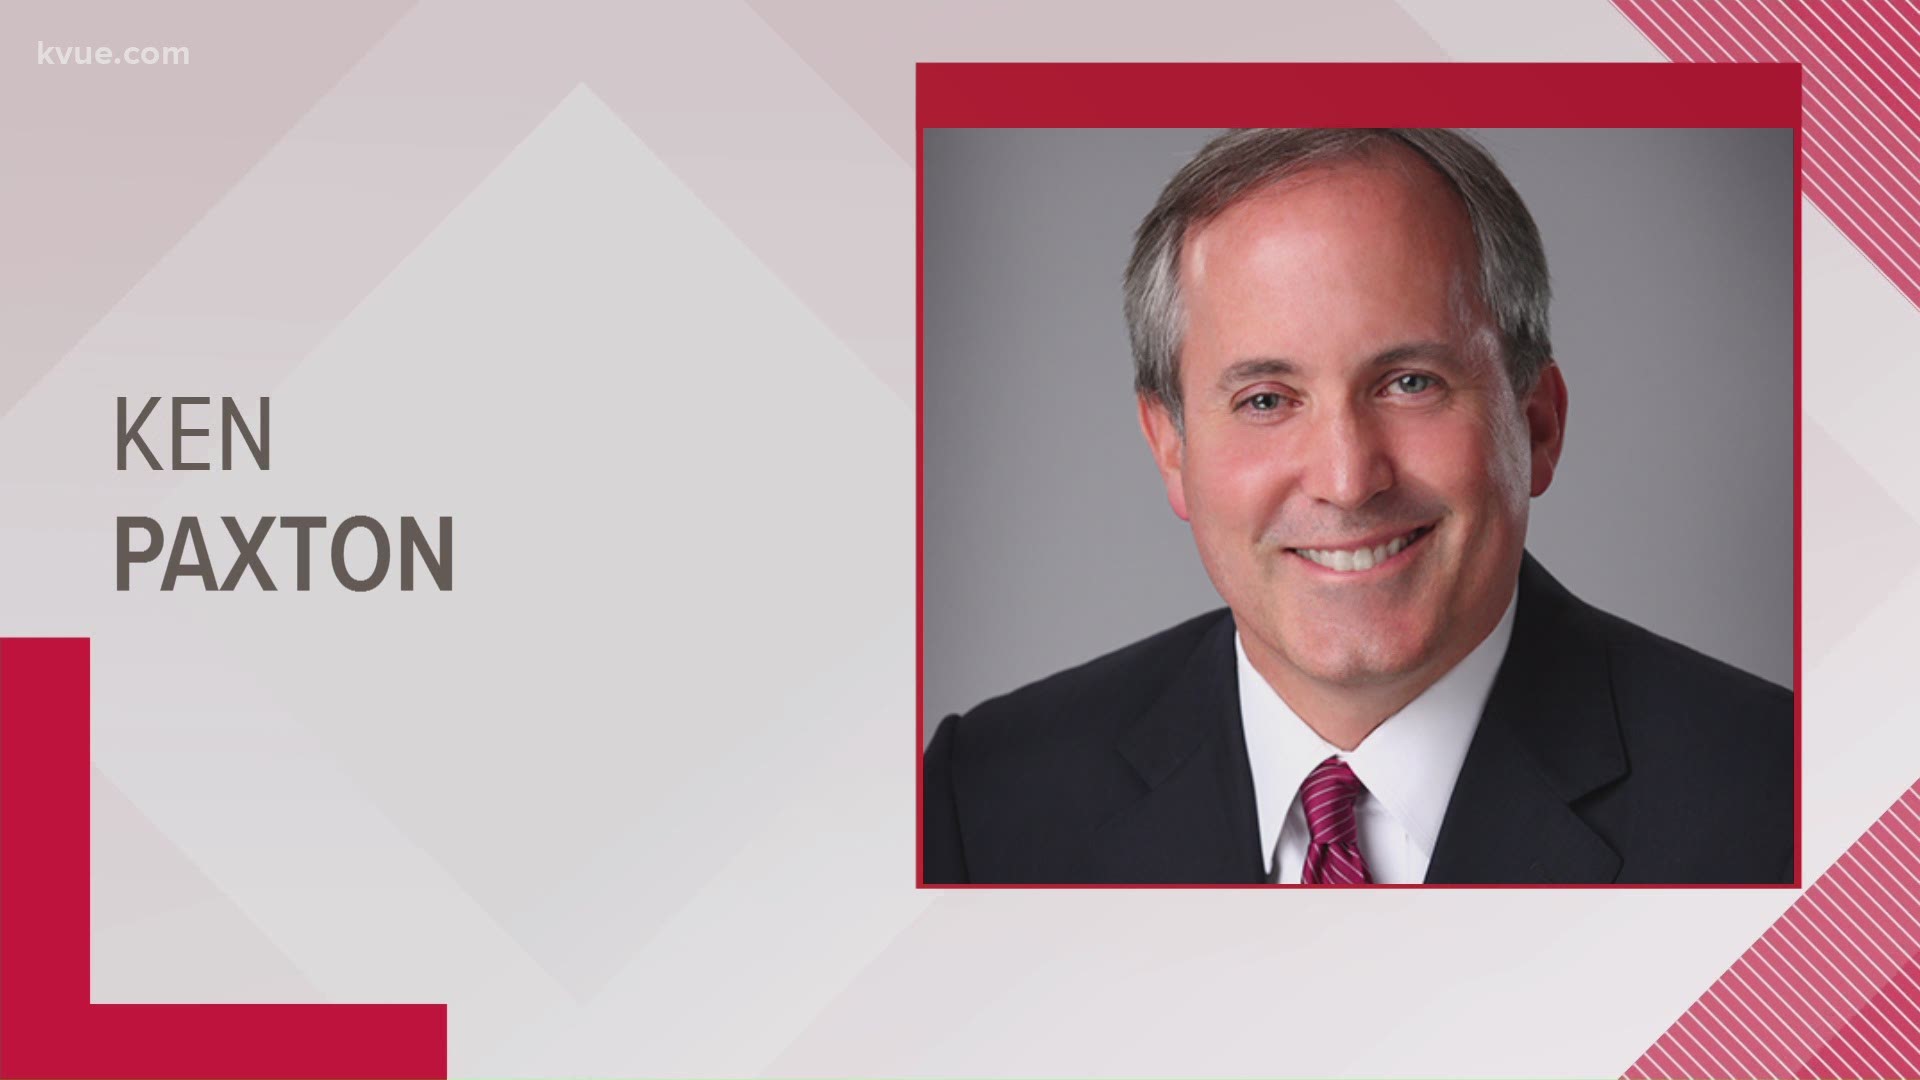 Texas Attorney General Ken Paxton is facing a federal complaint over alleged bribery and abuse of office.